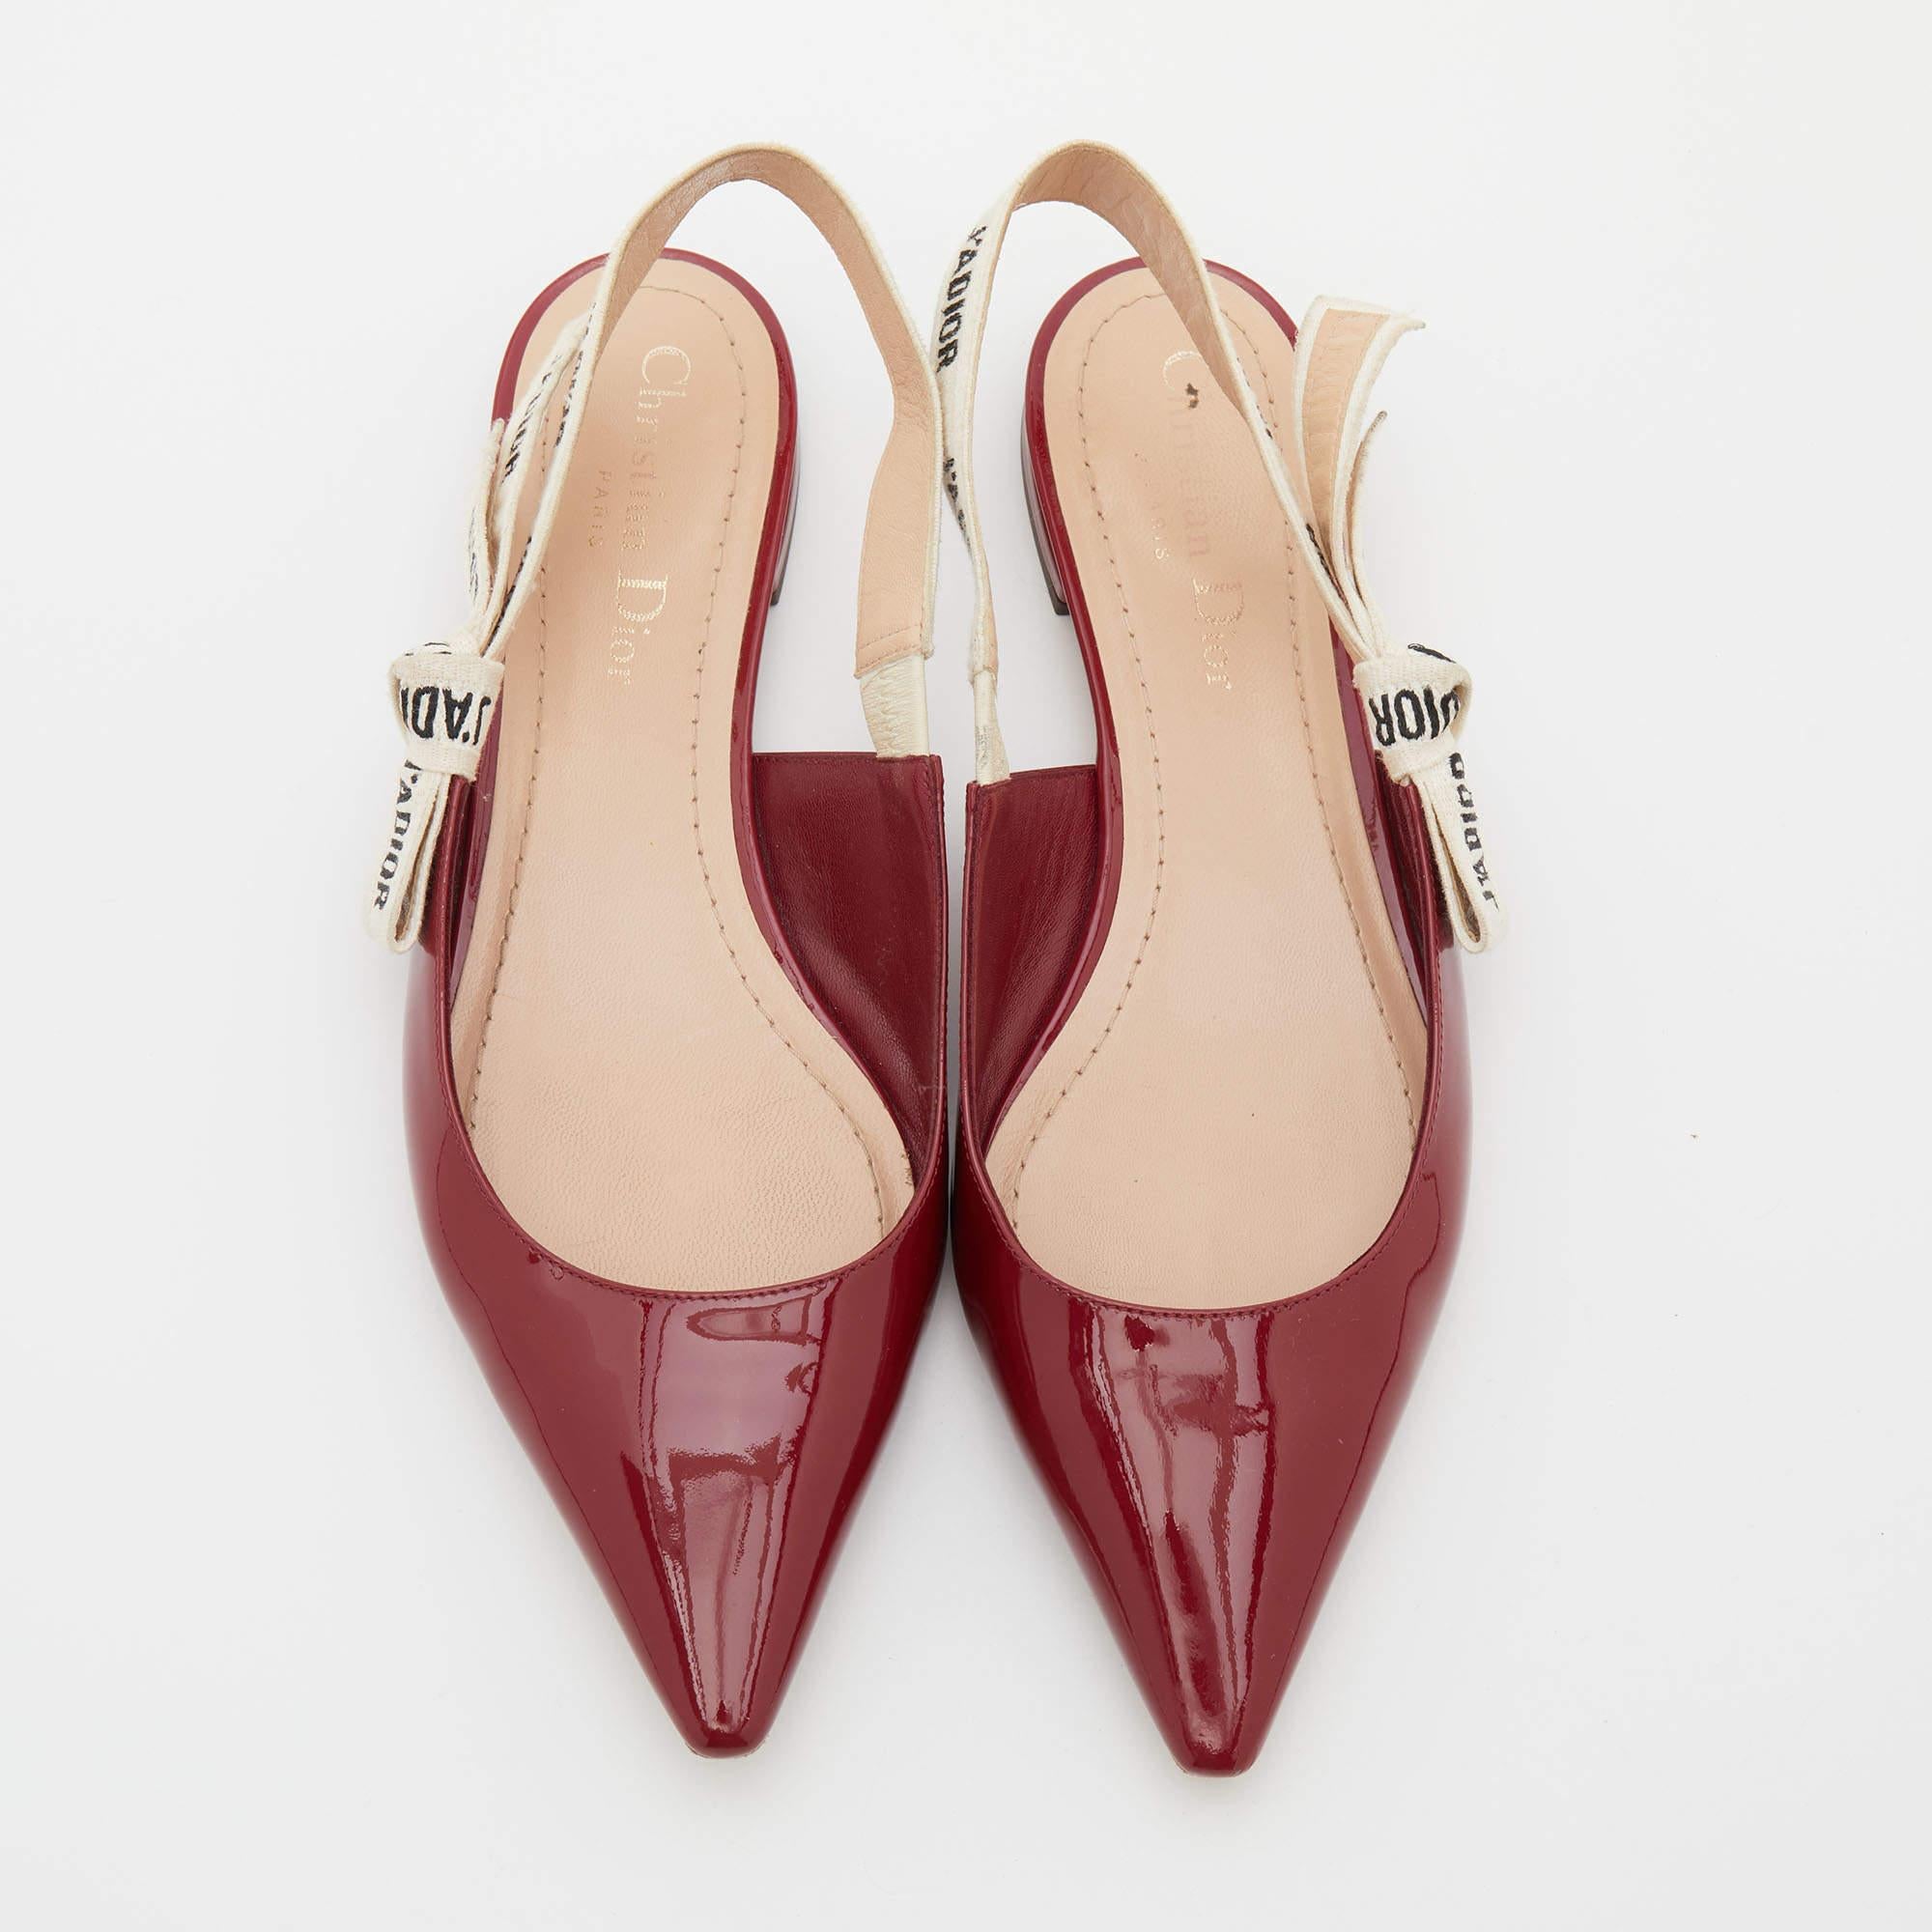 Dior Red Patent Leather J'Adior Slingback Flats Size 37 2